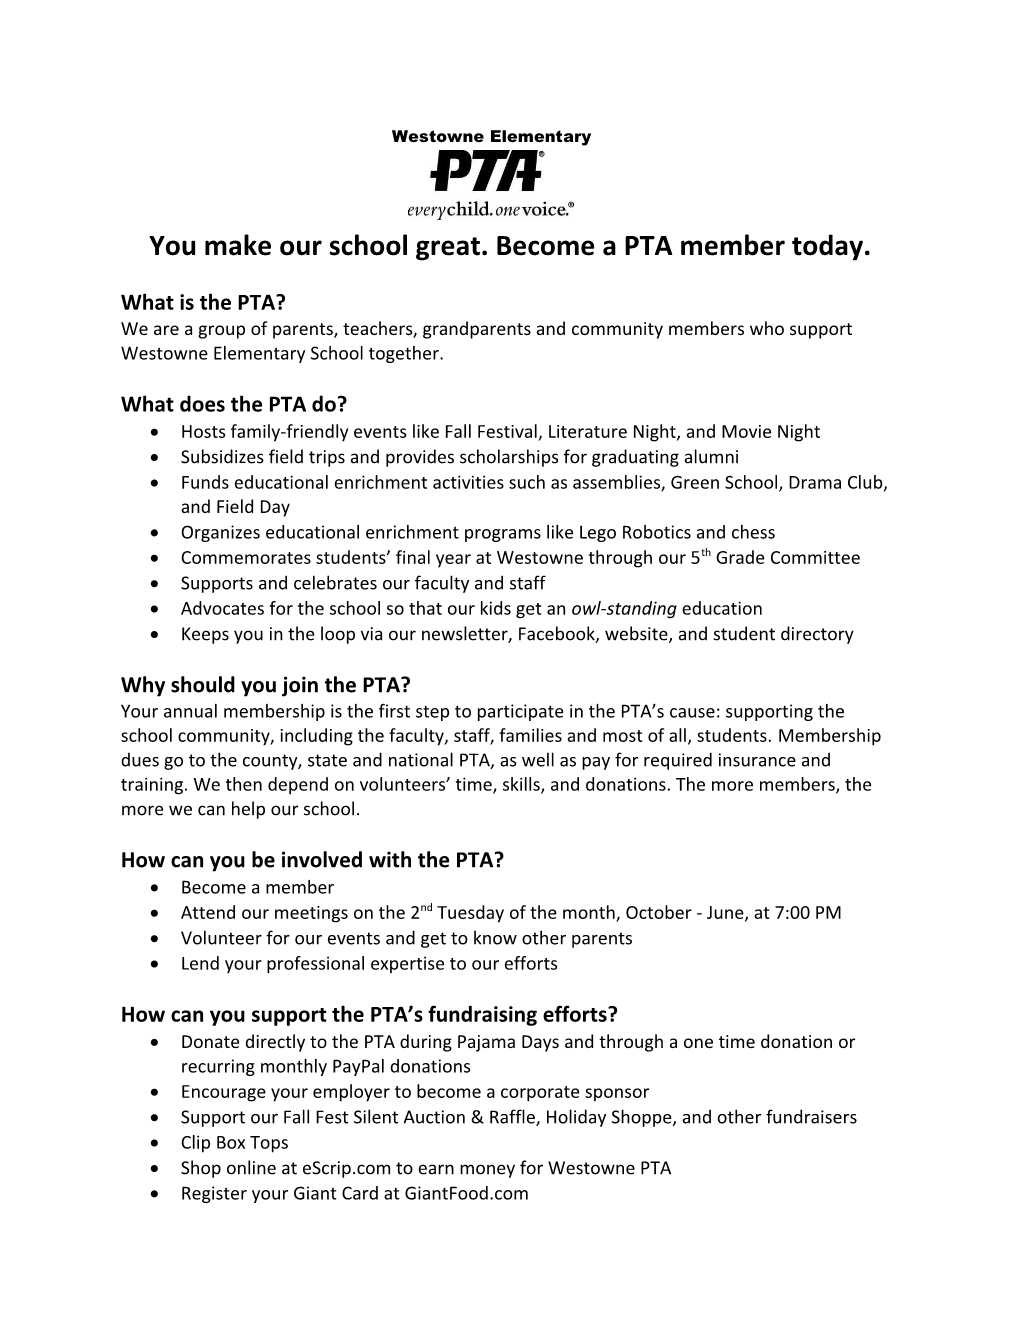 You Make Our School Great. Become a PTA Member Today